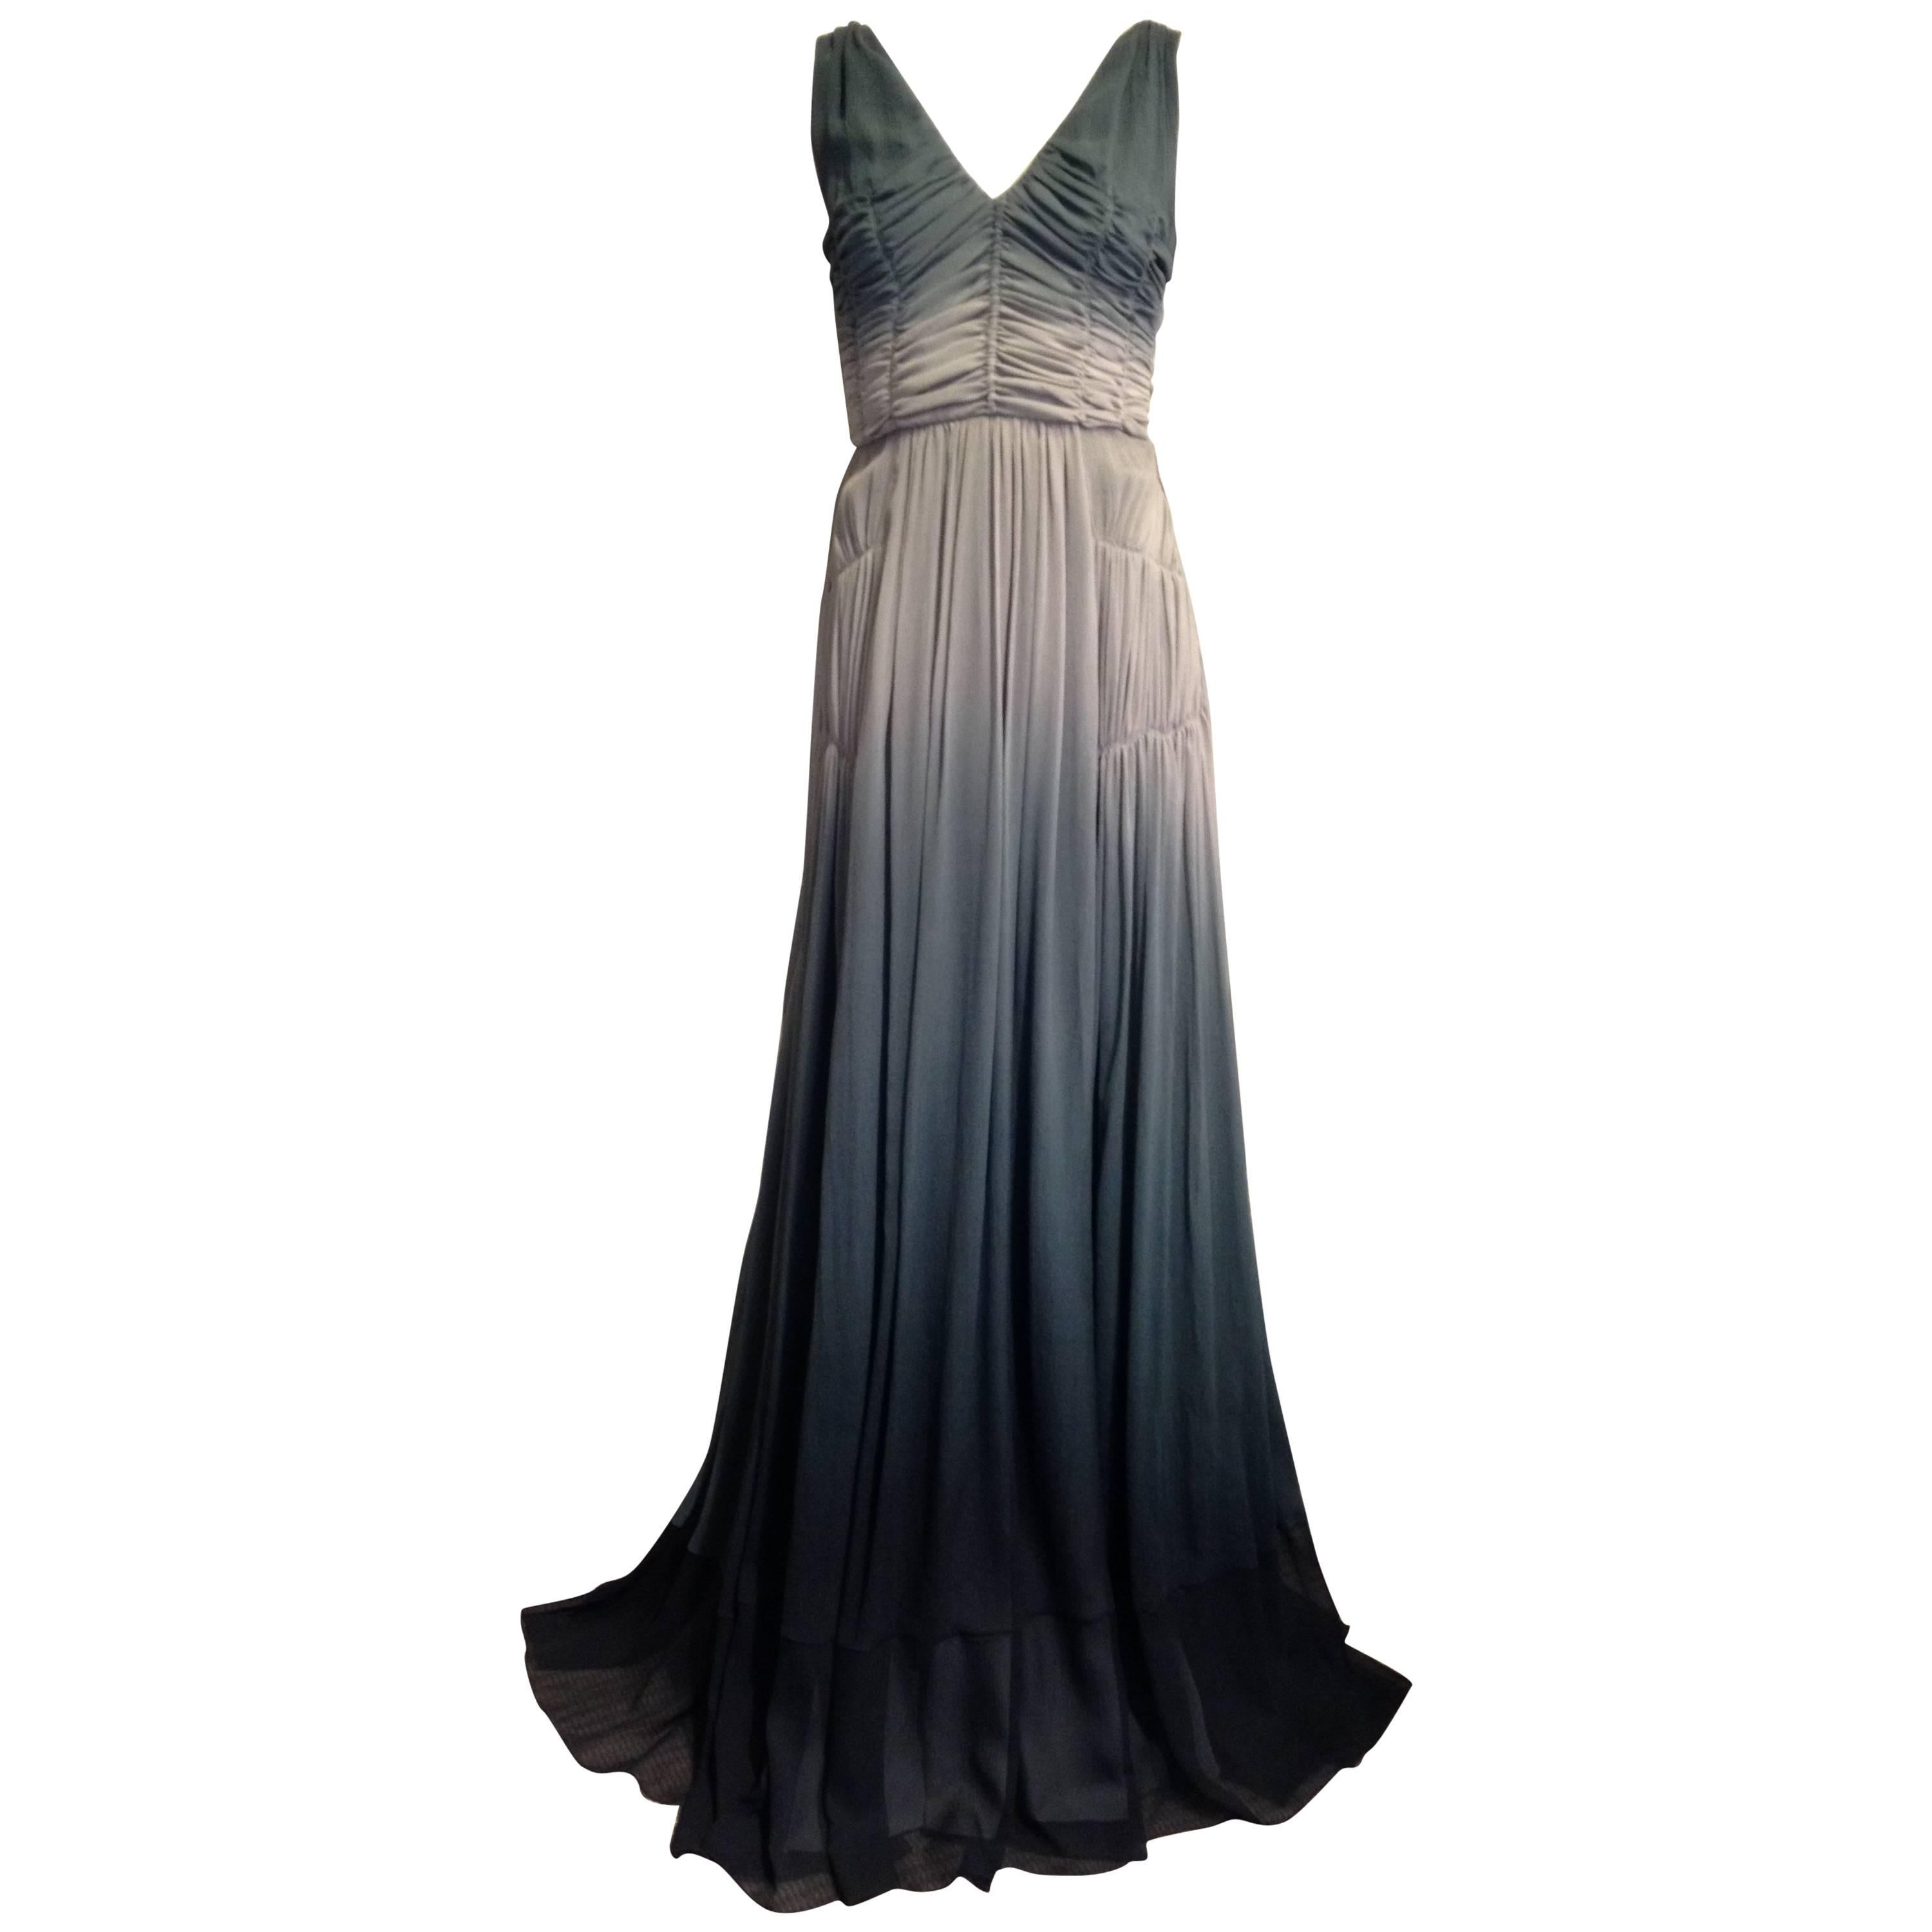 Burberry Sage and Green Ombre Chiffon Gown